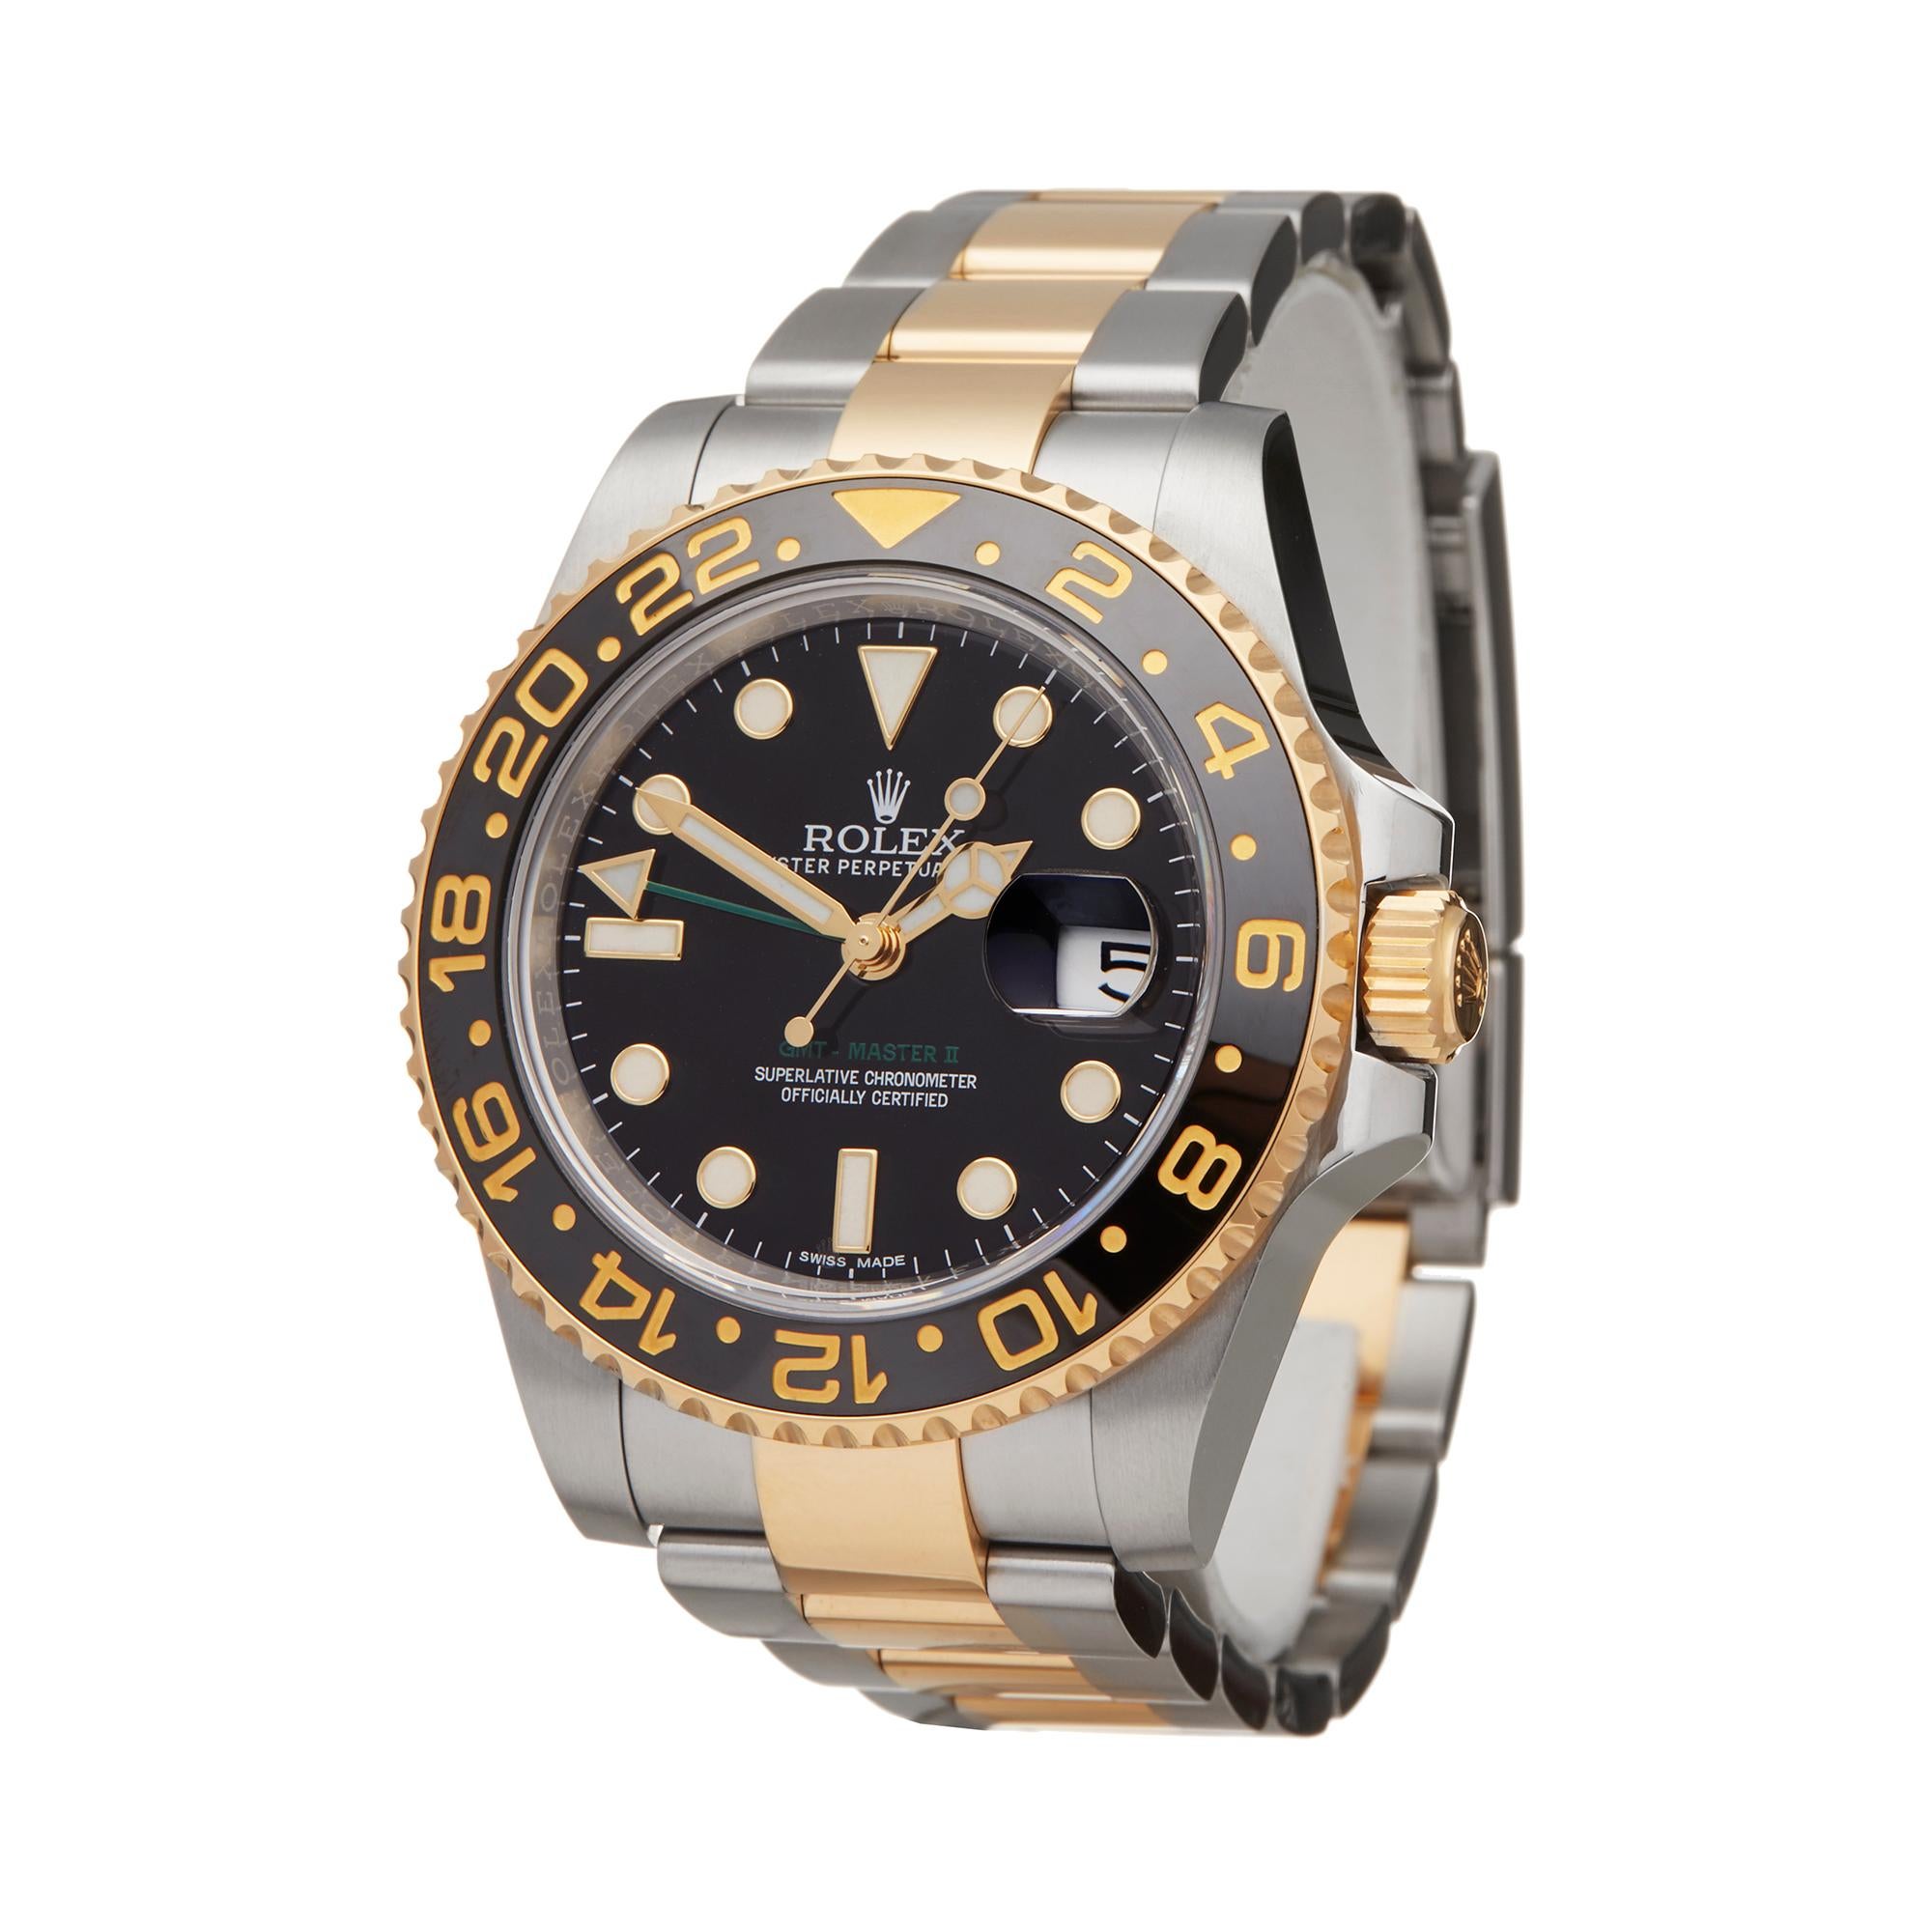 Reference: W5936
Manufacturer: Rolex
Model: GMT-Master II
Model Reference: 116713LN
Age: 1st June 2017
Gender: Men's
Box and Papes: Box, Manuals and Guarantee
Dial: Black
Glass: Sapphire Crystal
Movement: Automatic
Water Resistance: To Manufacturers